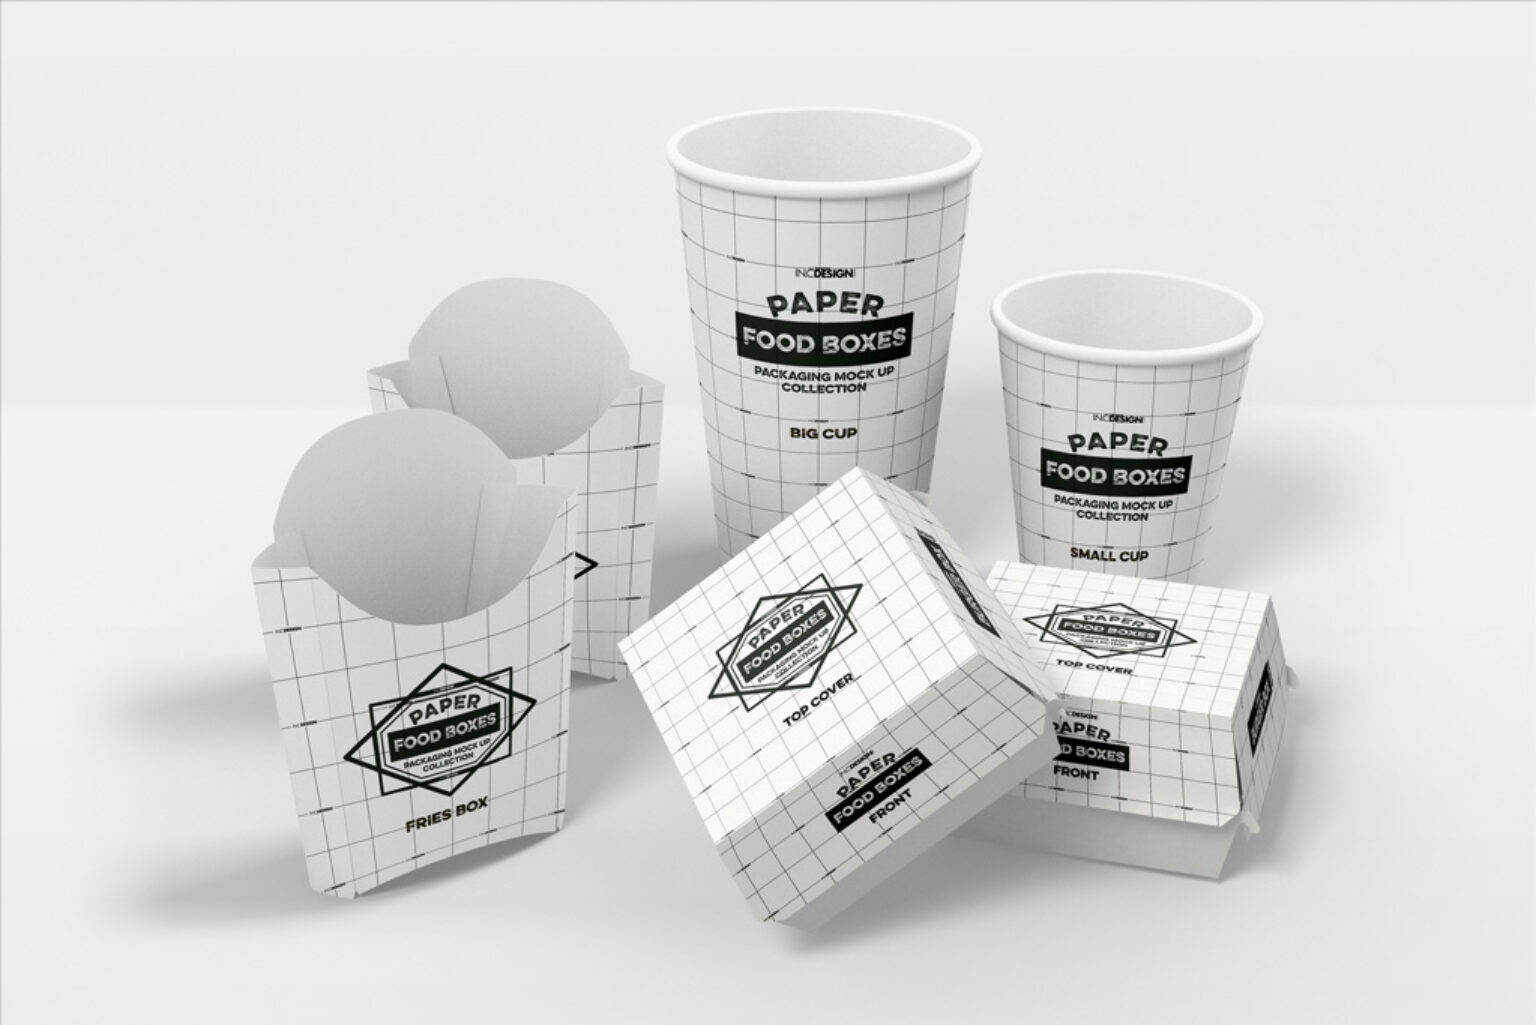 Download Fast Food Packaging (Boxes and Cups) Mockup | Mockup World